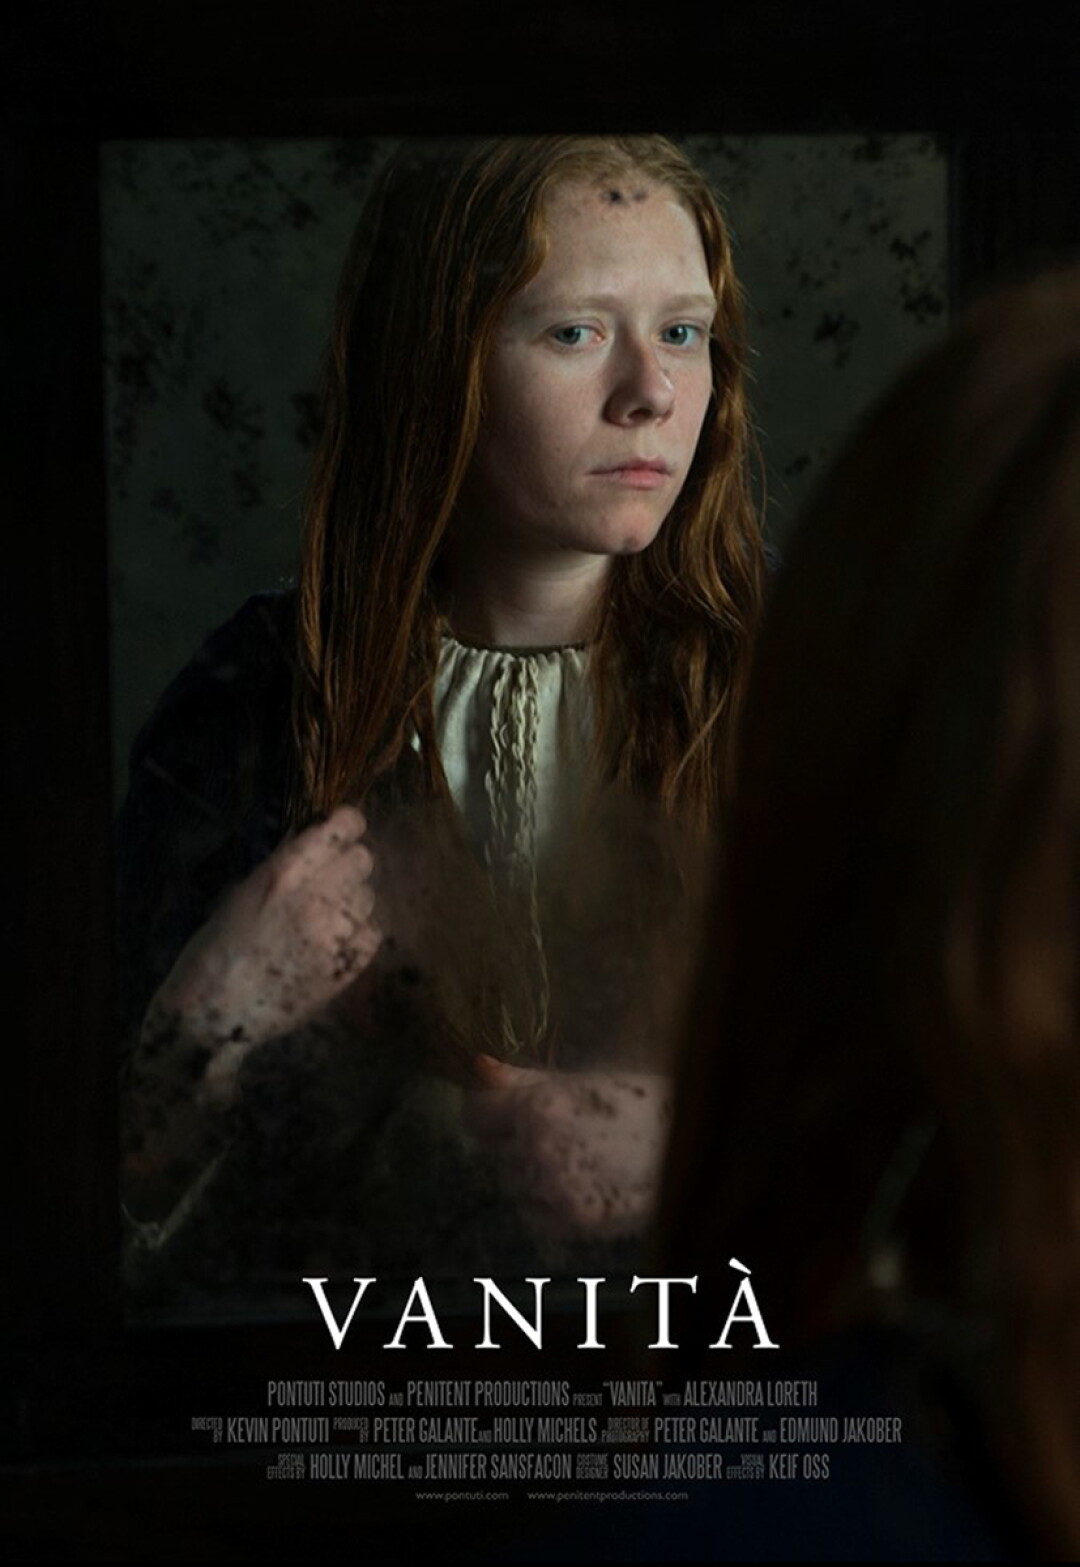 VANITÀ is just one of the stunning short films screening at the Chippewa Valley Film Festival happening in downtown Eau Claire on April 21.